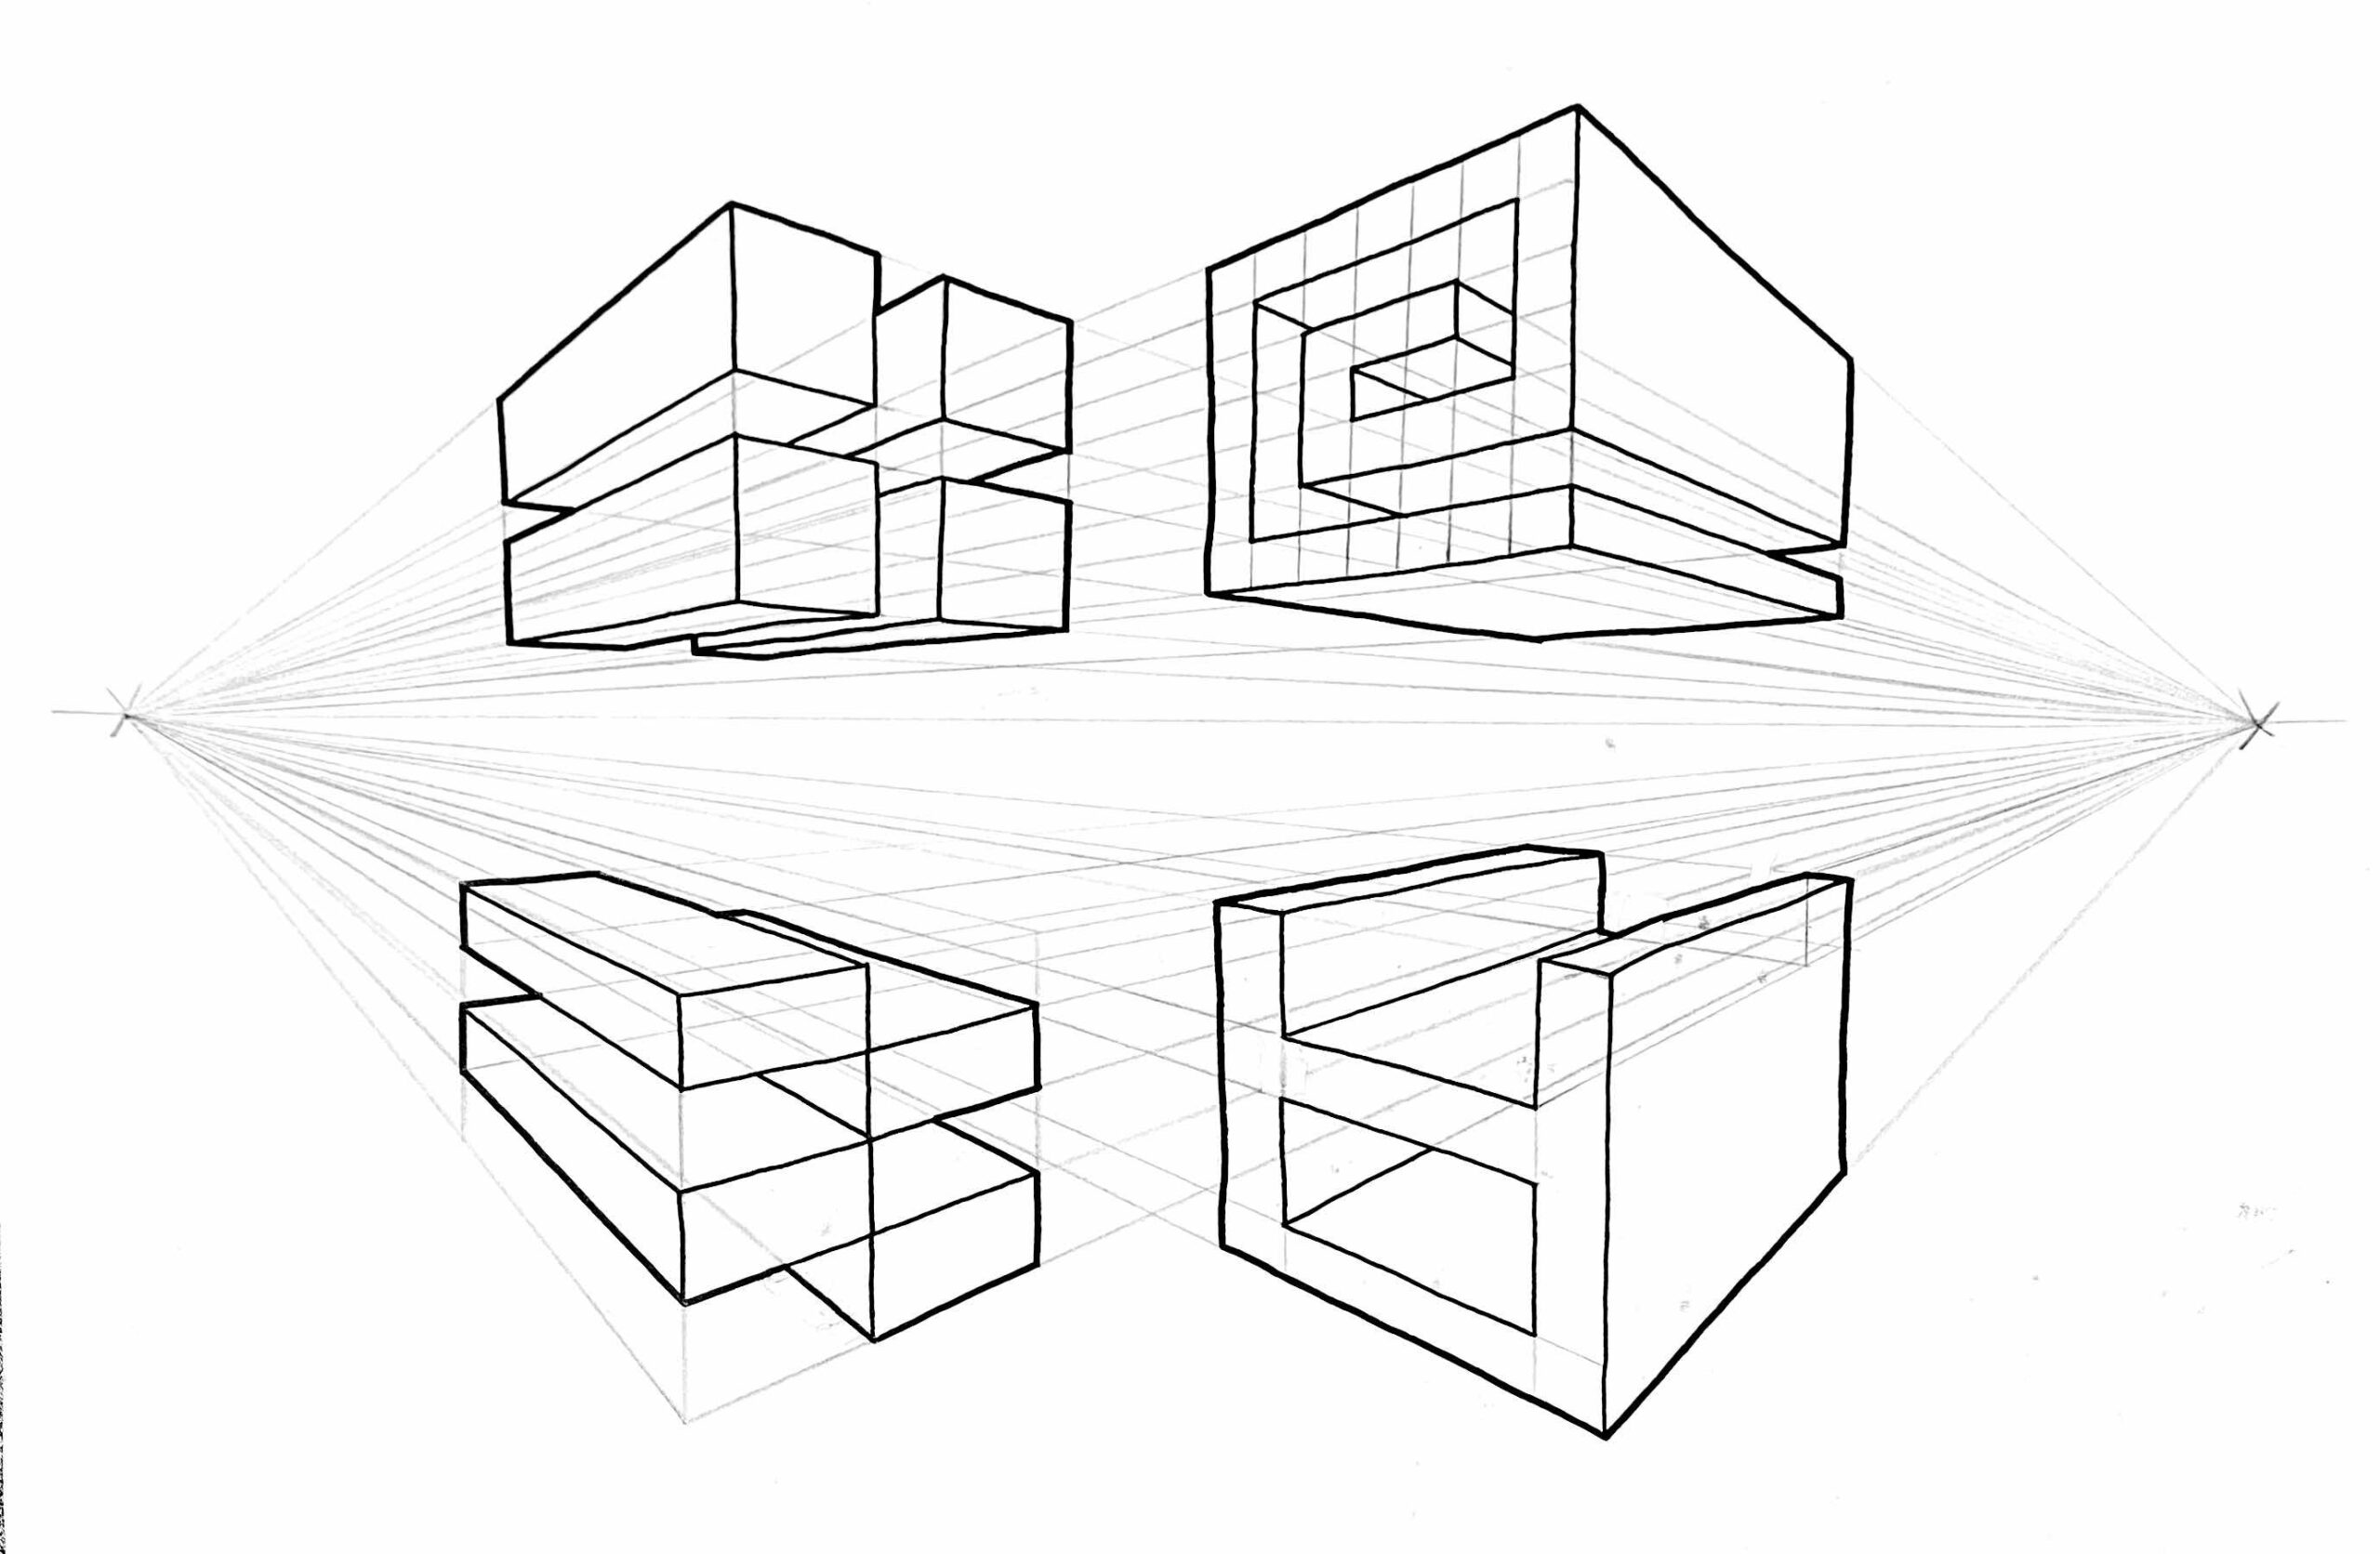 Four-Point Perspective Drawing  How to Draw Using Perspective